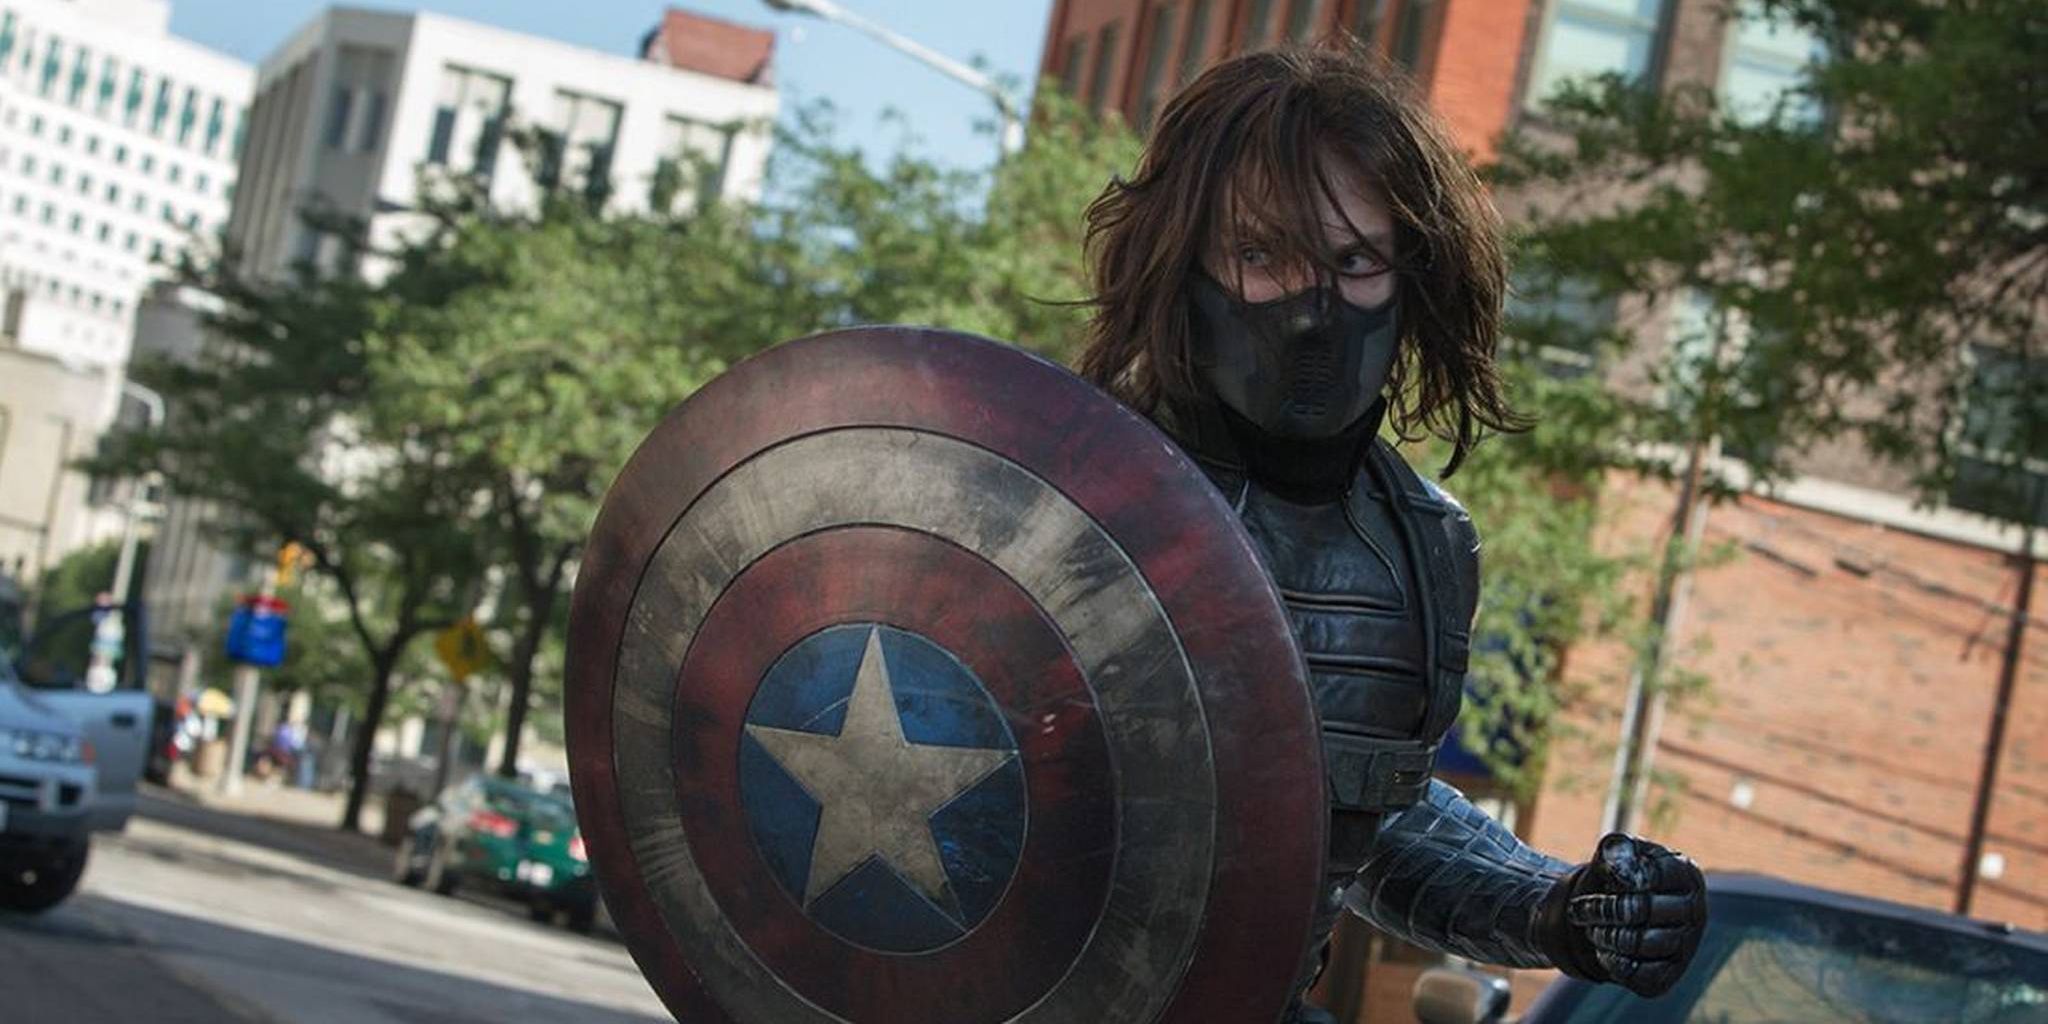 Winter Soldier holding the Captain America shield